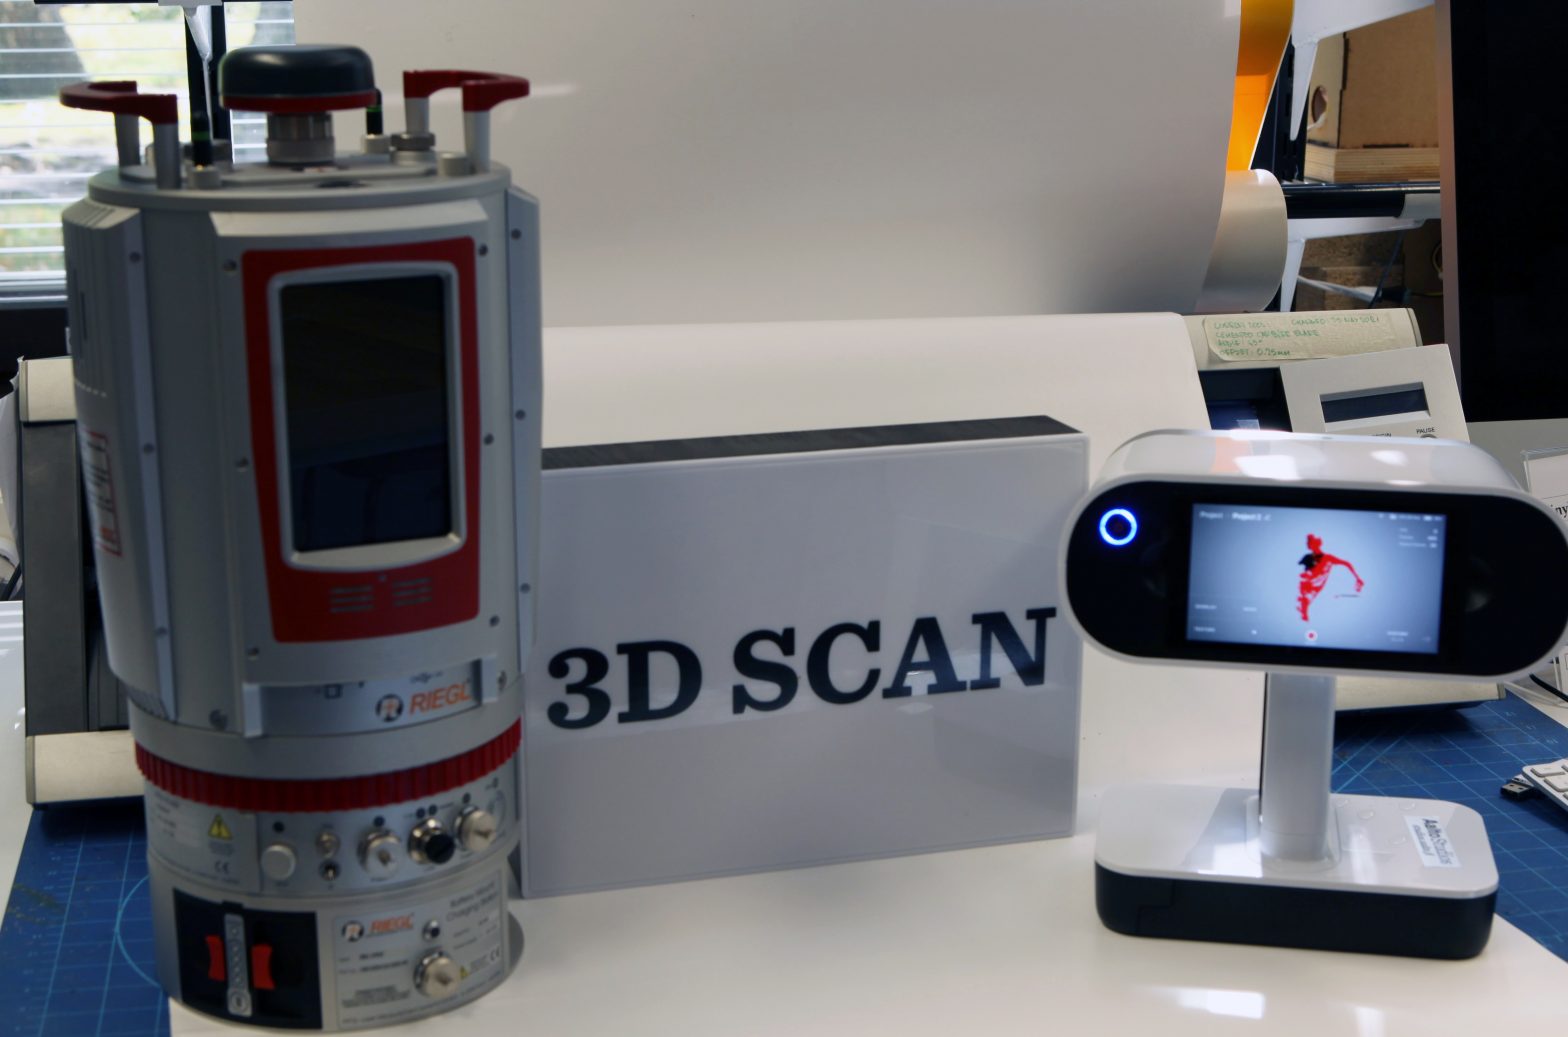 New state of the art 3D scanners available